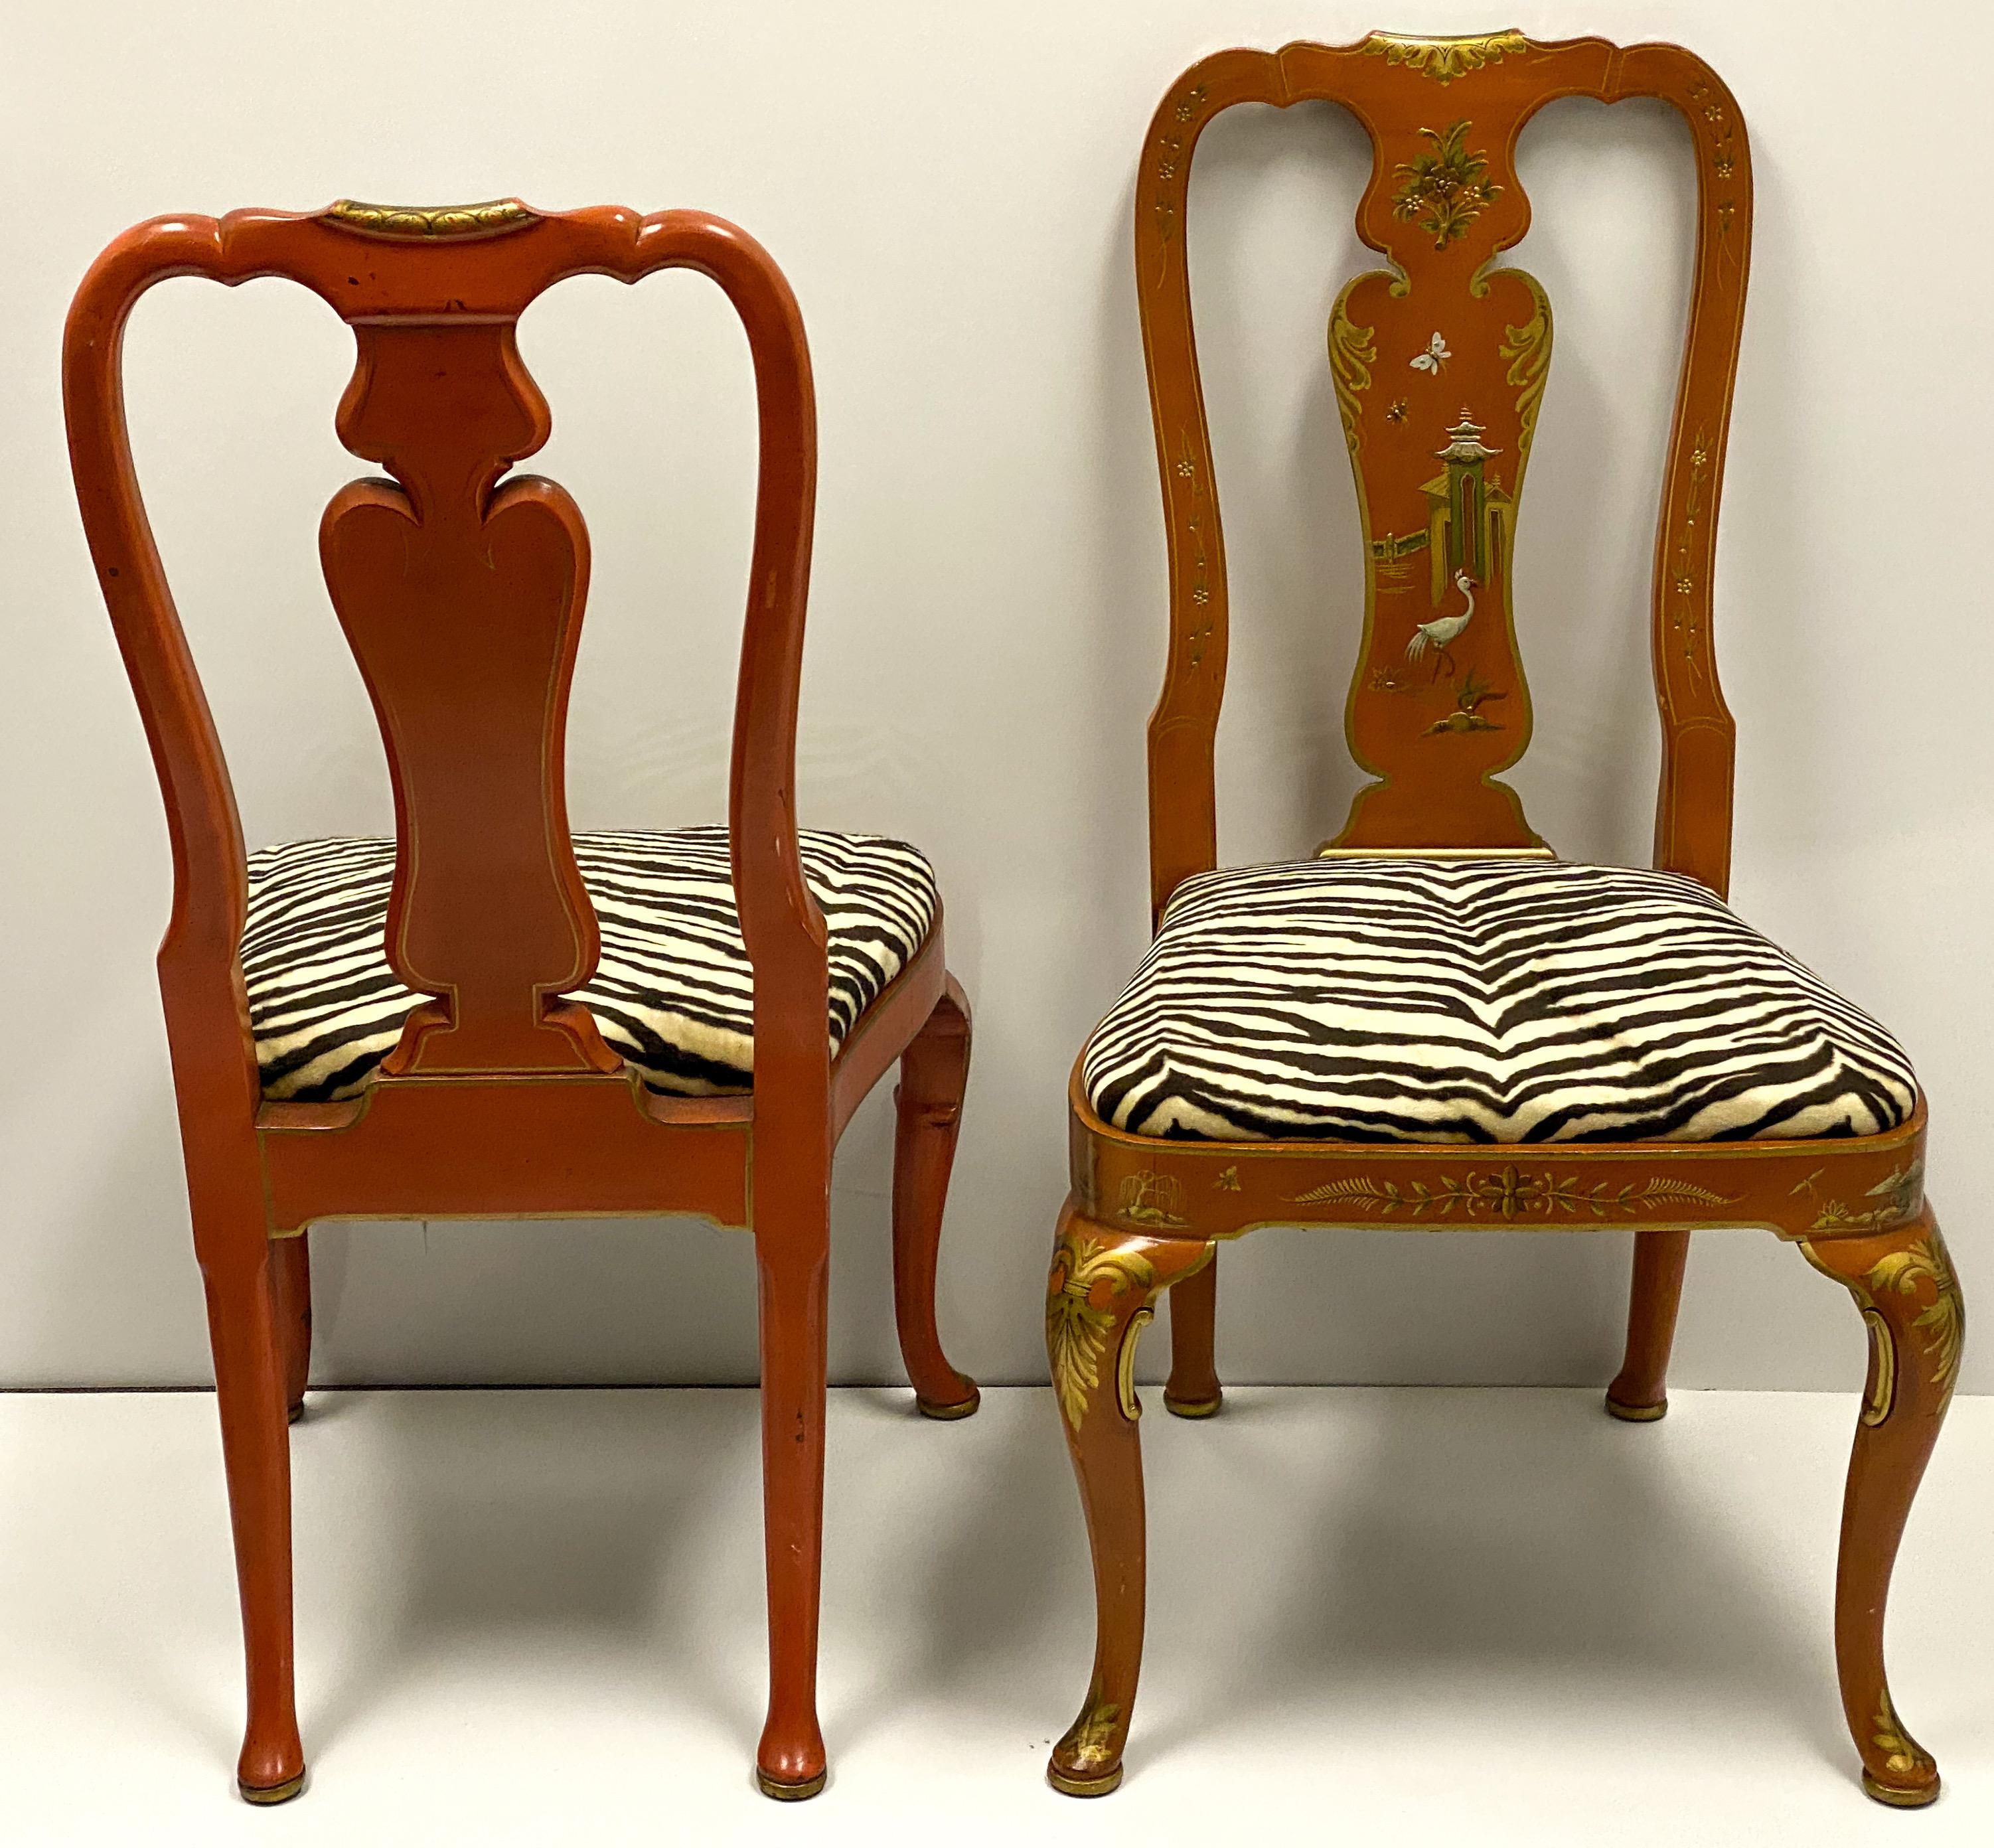 American Orange Chinoiserie Queen Anne Side Chairs by Kindel Furniture, Pair